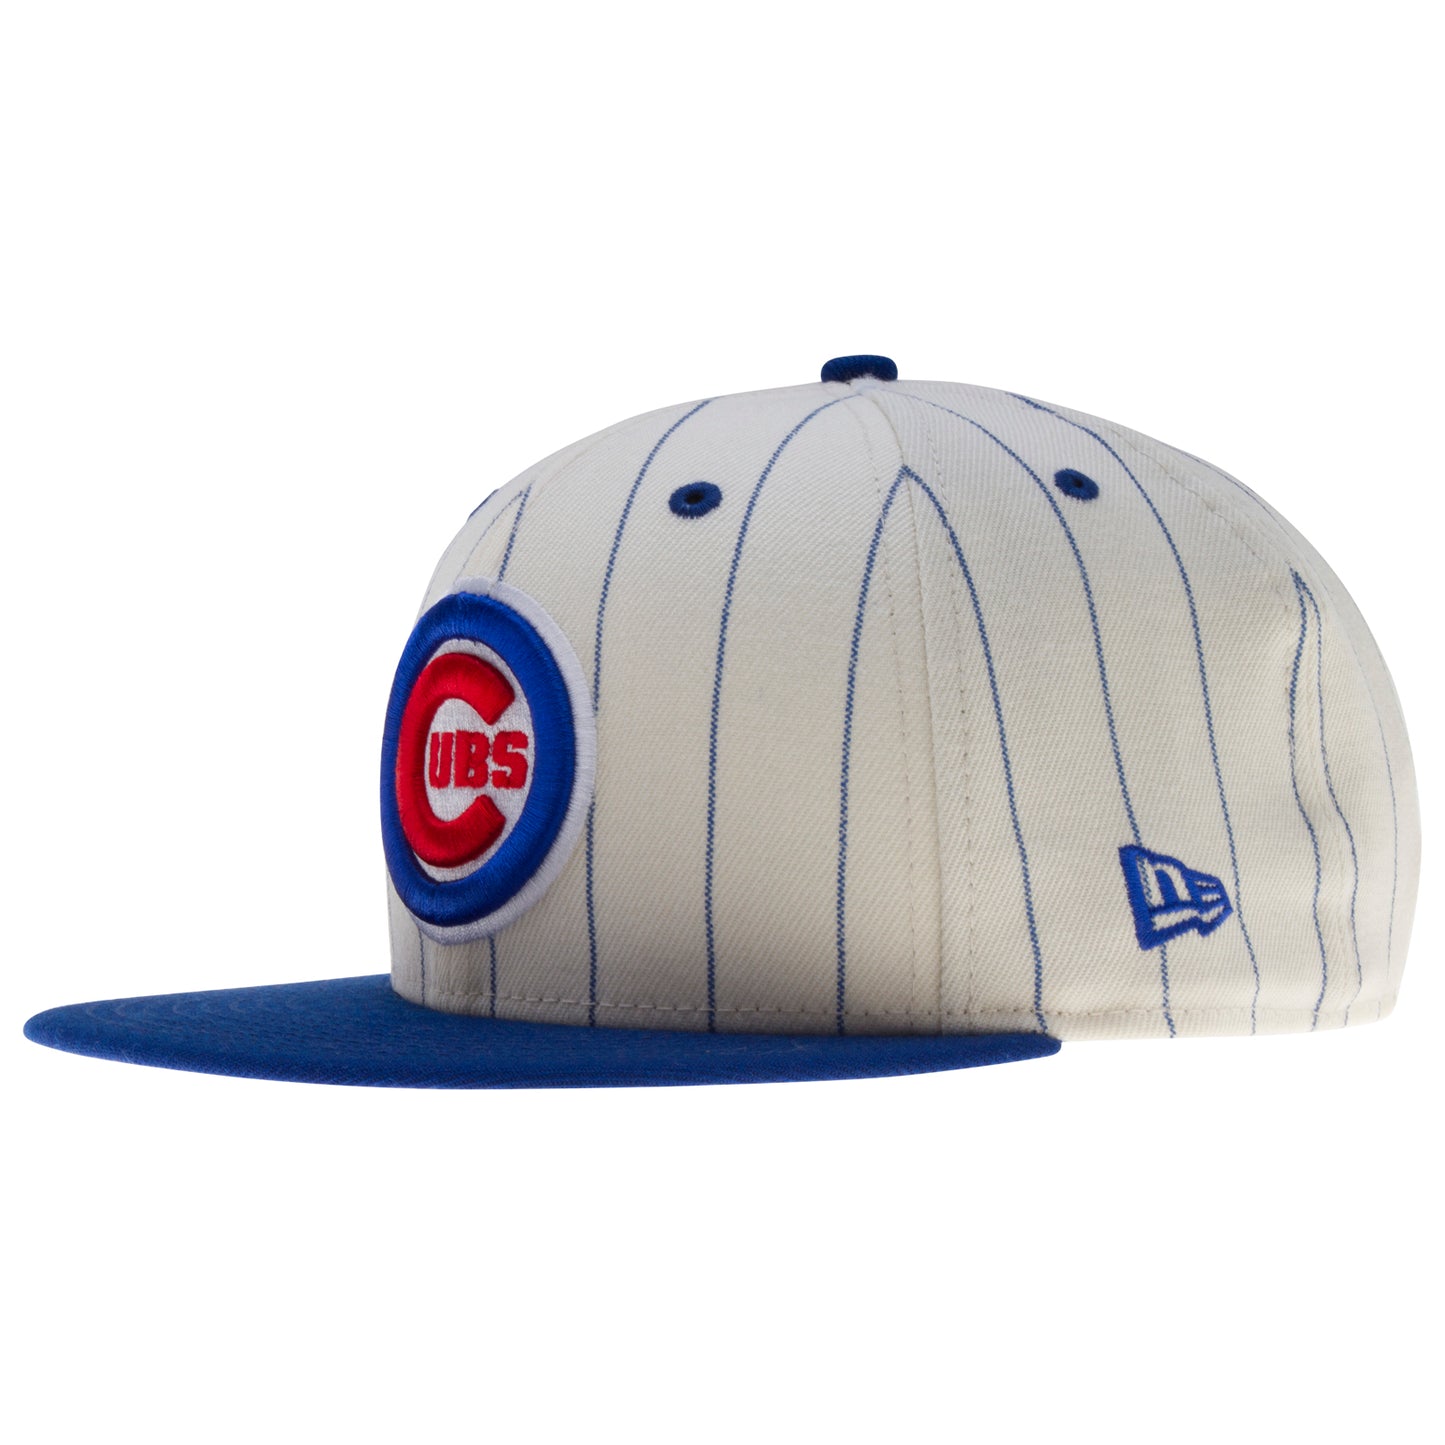 Chicago Cubs White and Royal Pinstripe Bullseye Logo and W Flag Snapback Hat